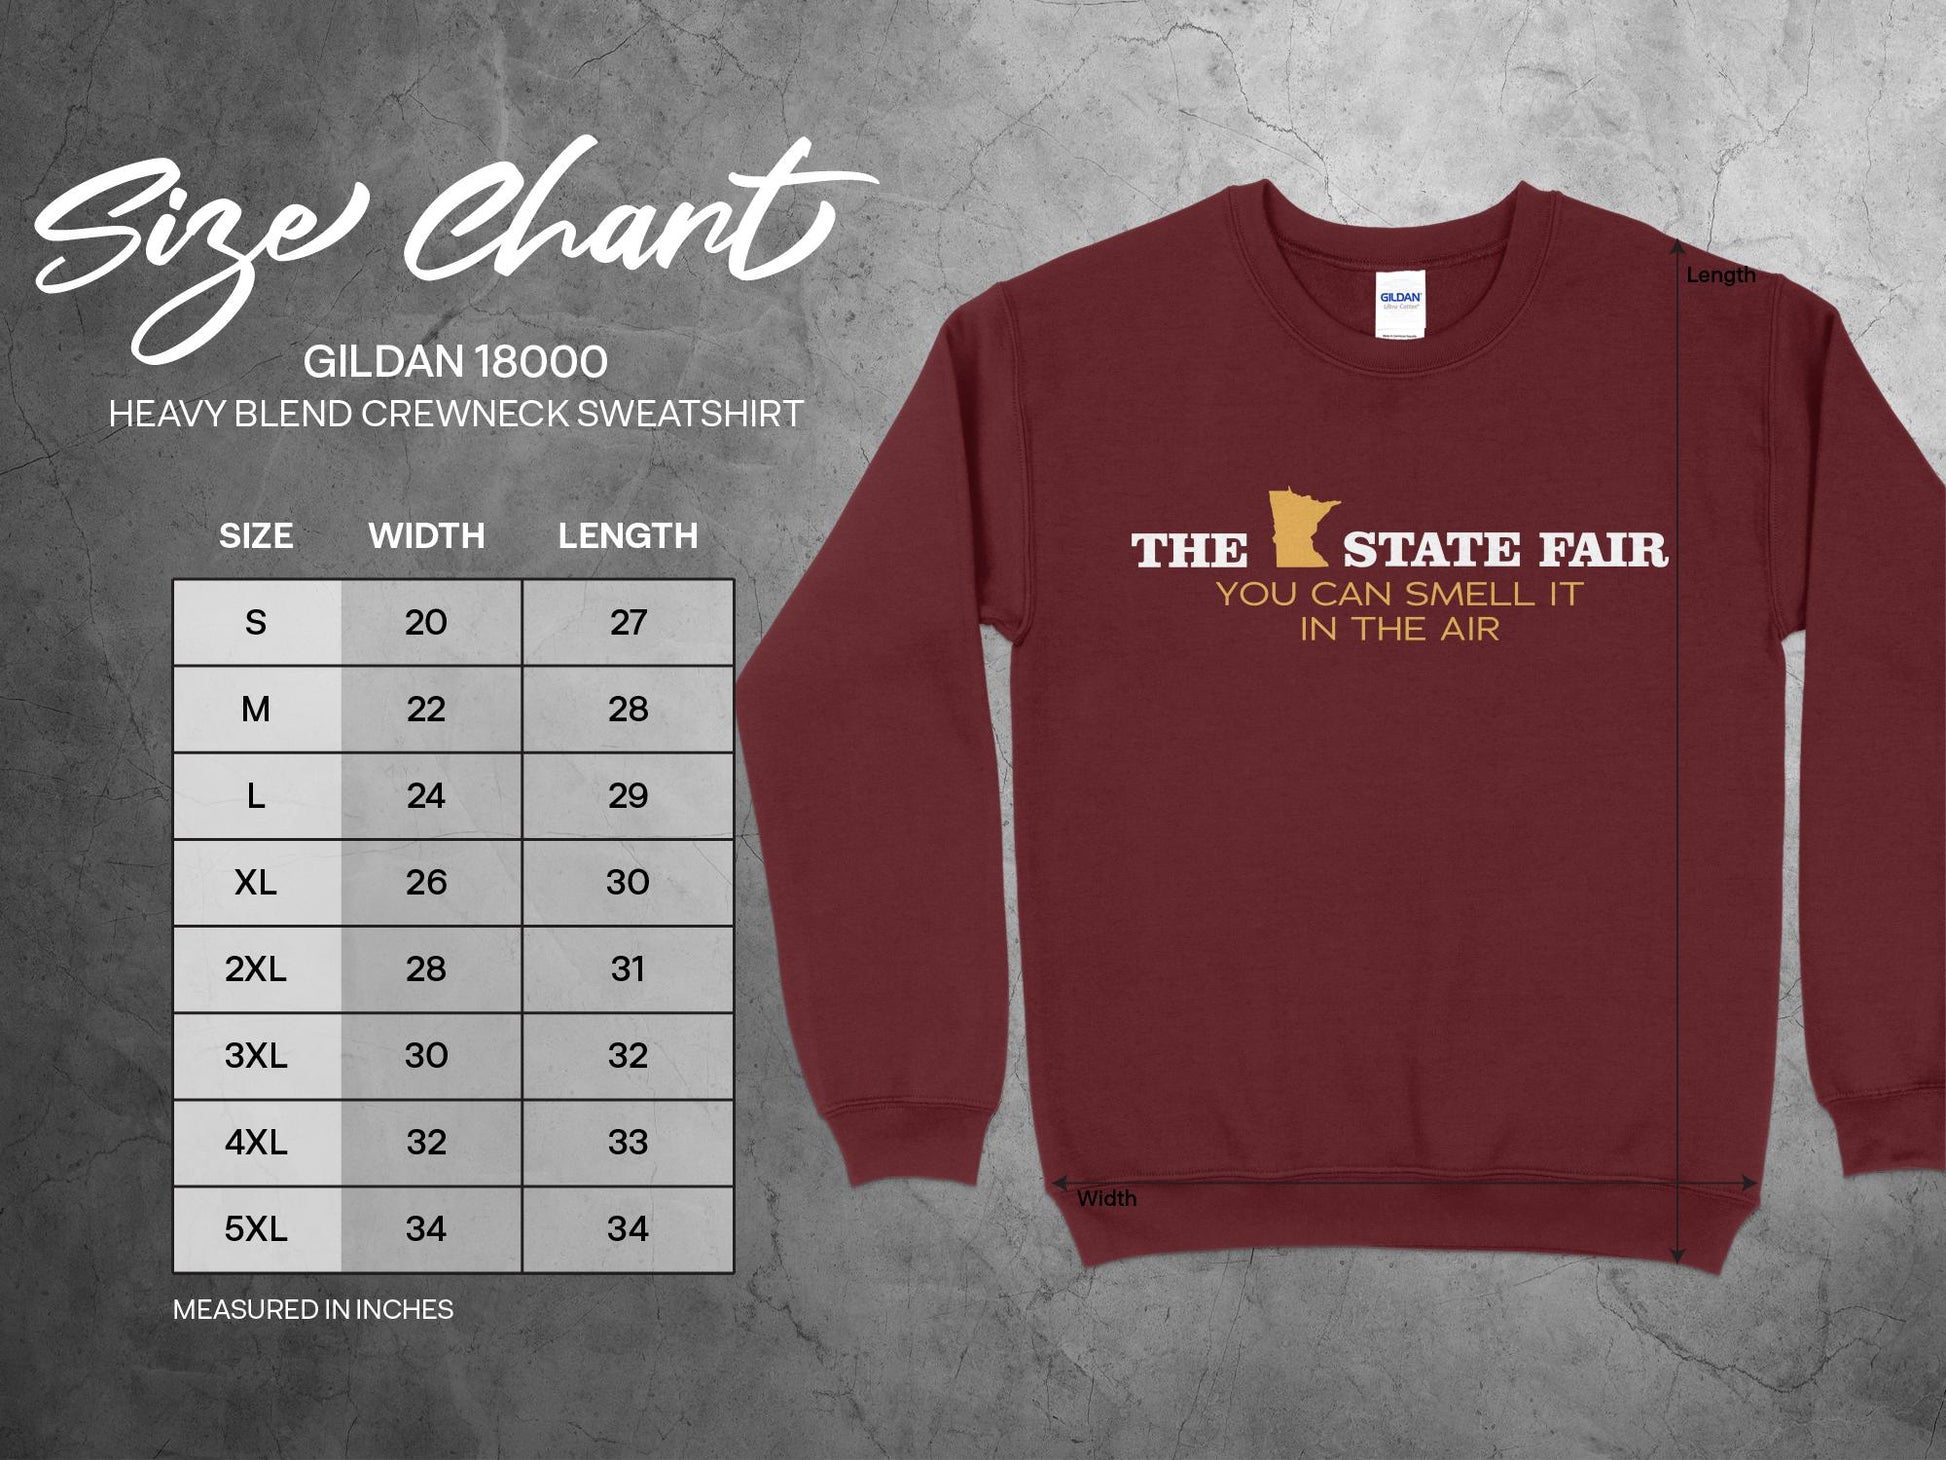 Minnesota State Fair Sweatshirt - You Can Smell It in the Air, sizing chart